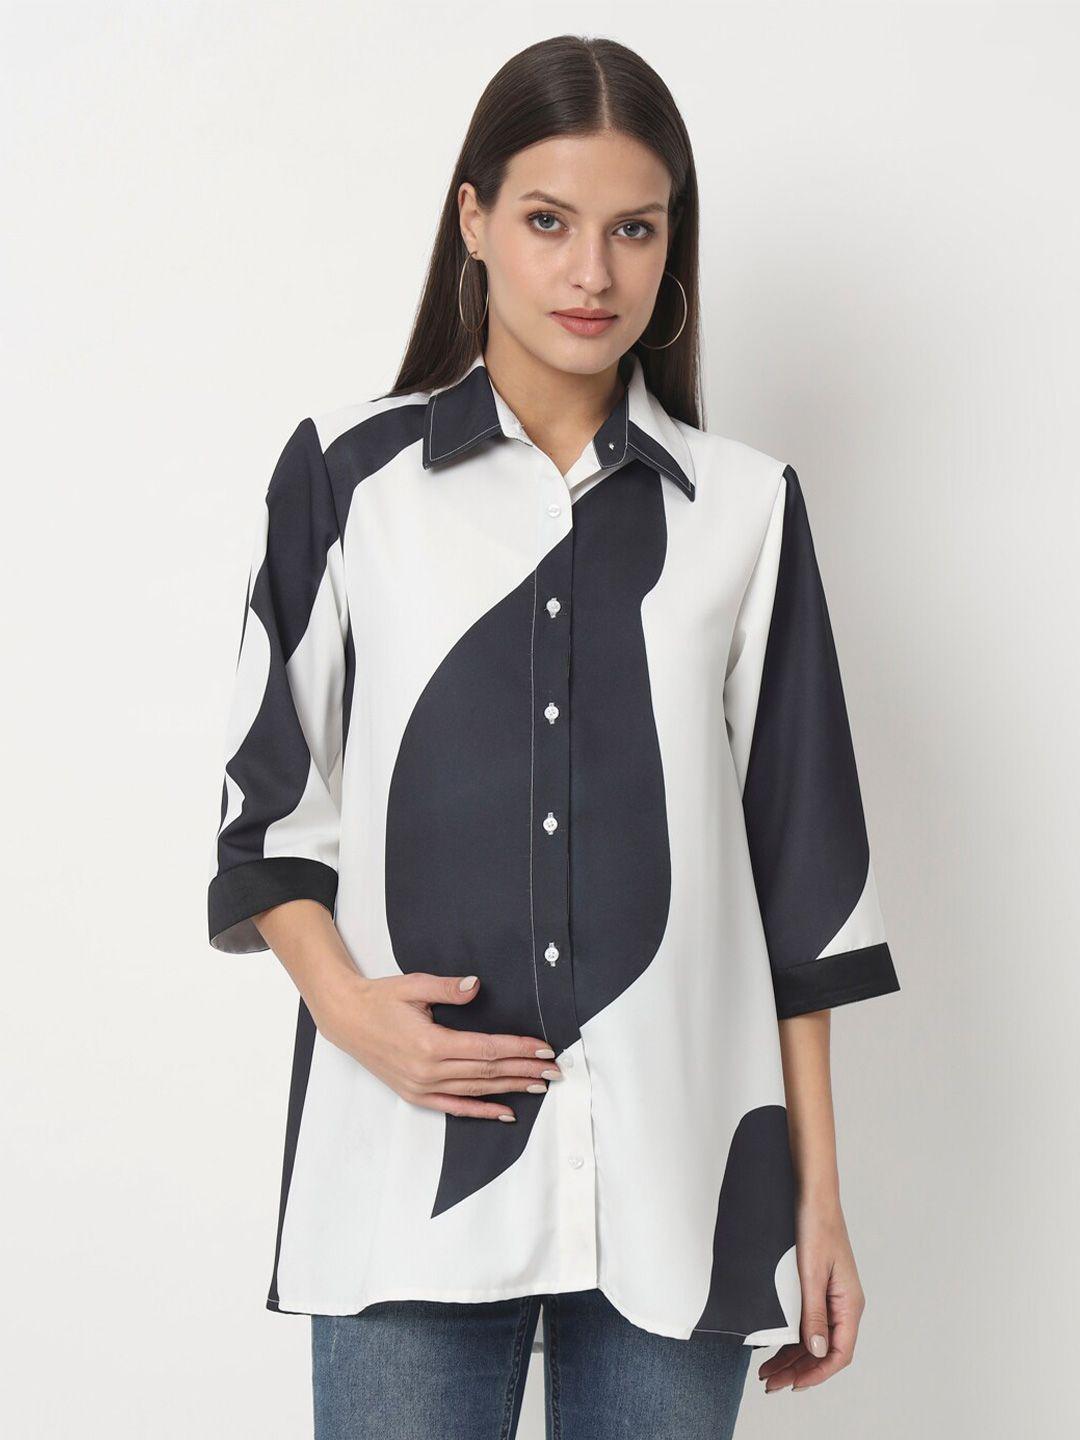 angloindu abstract printed colourblocked opaque striped maternity shirt